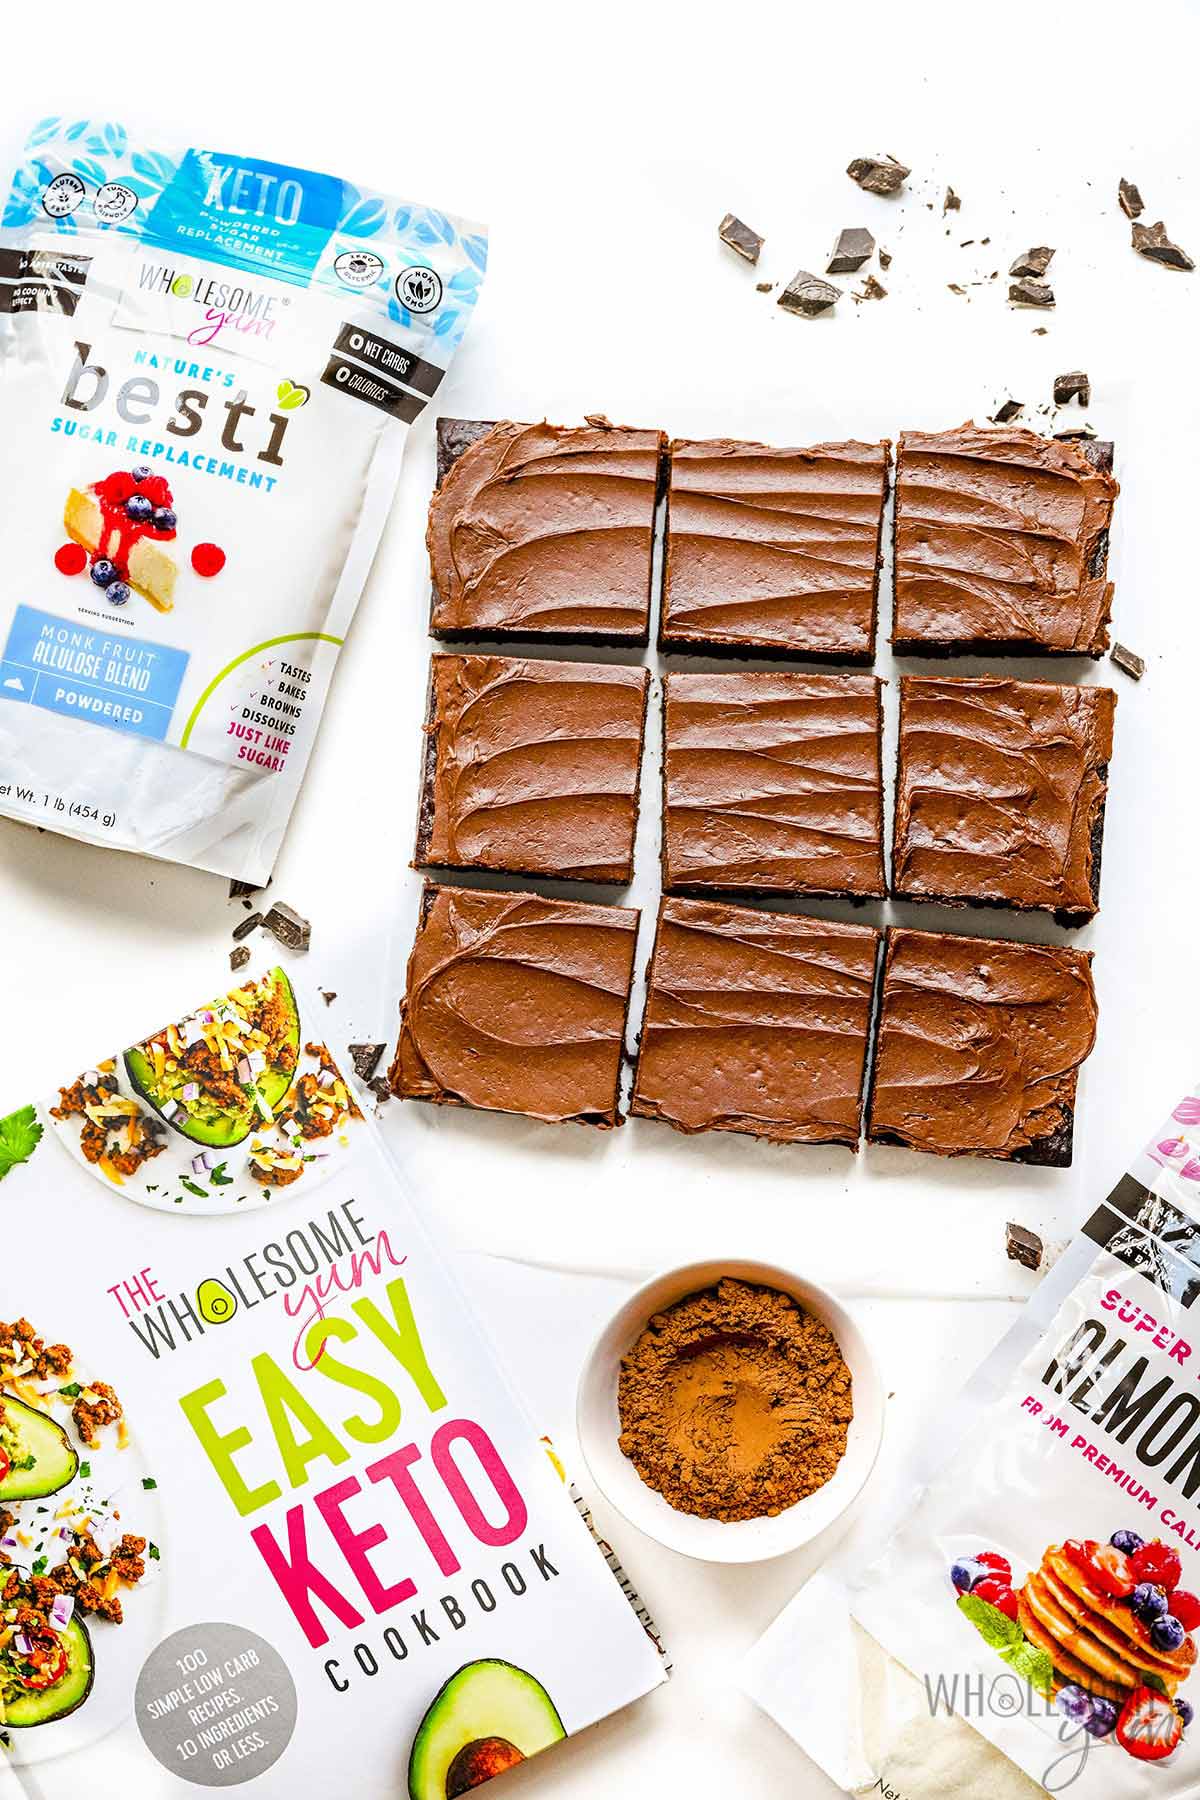 Keto brownies with bags of Besti almond flour, powdered Besti, and Easy Keto Cookbook.